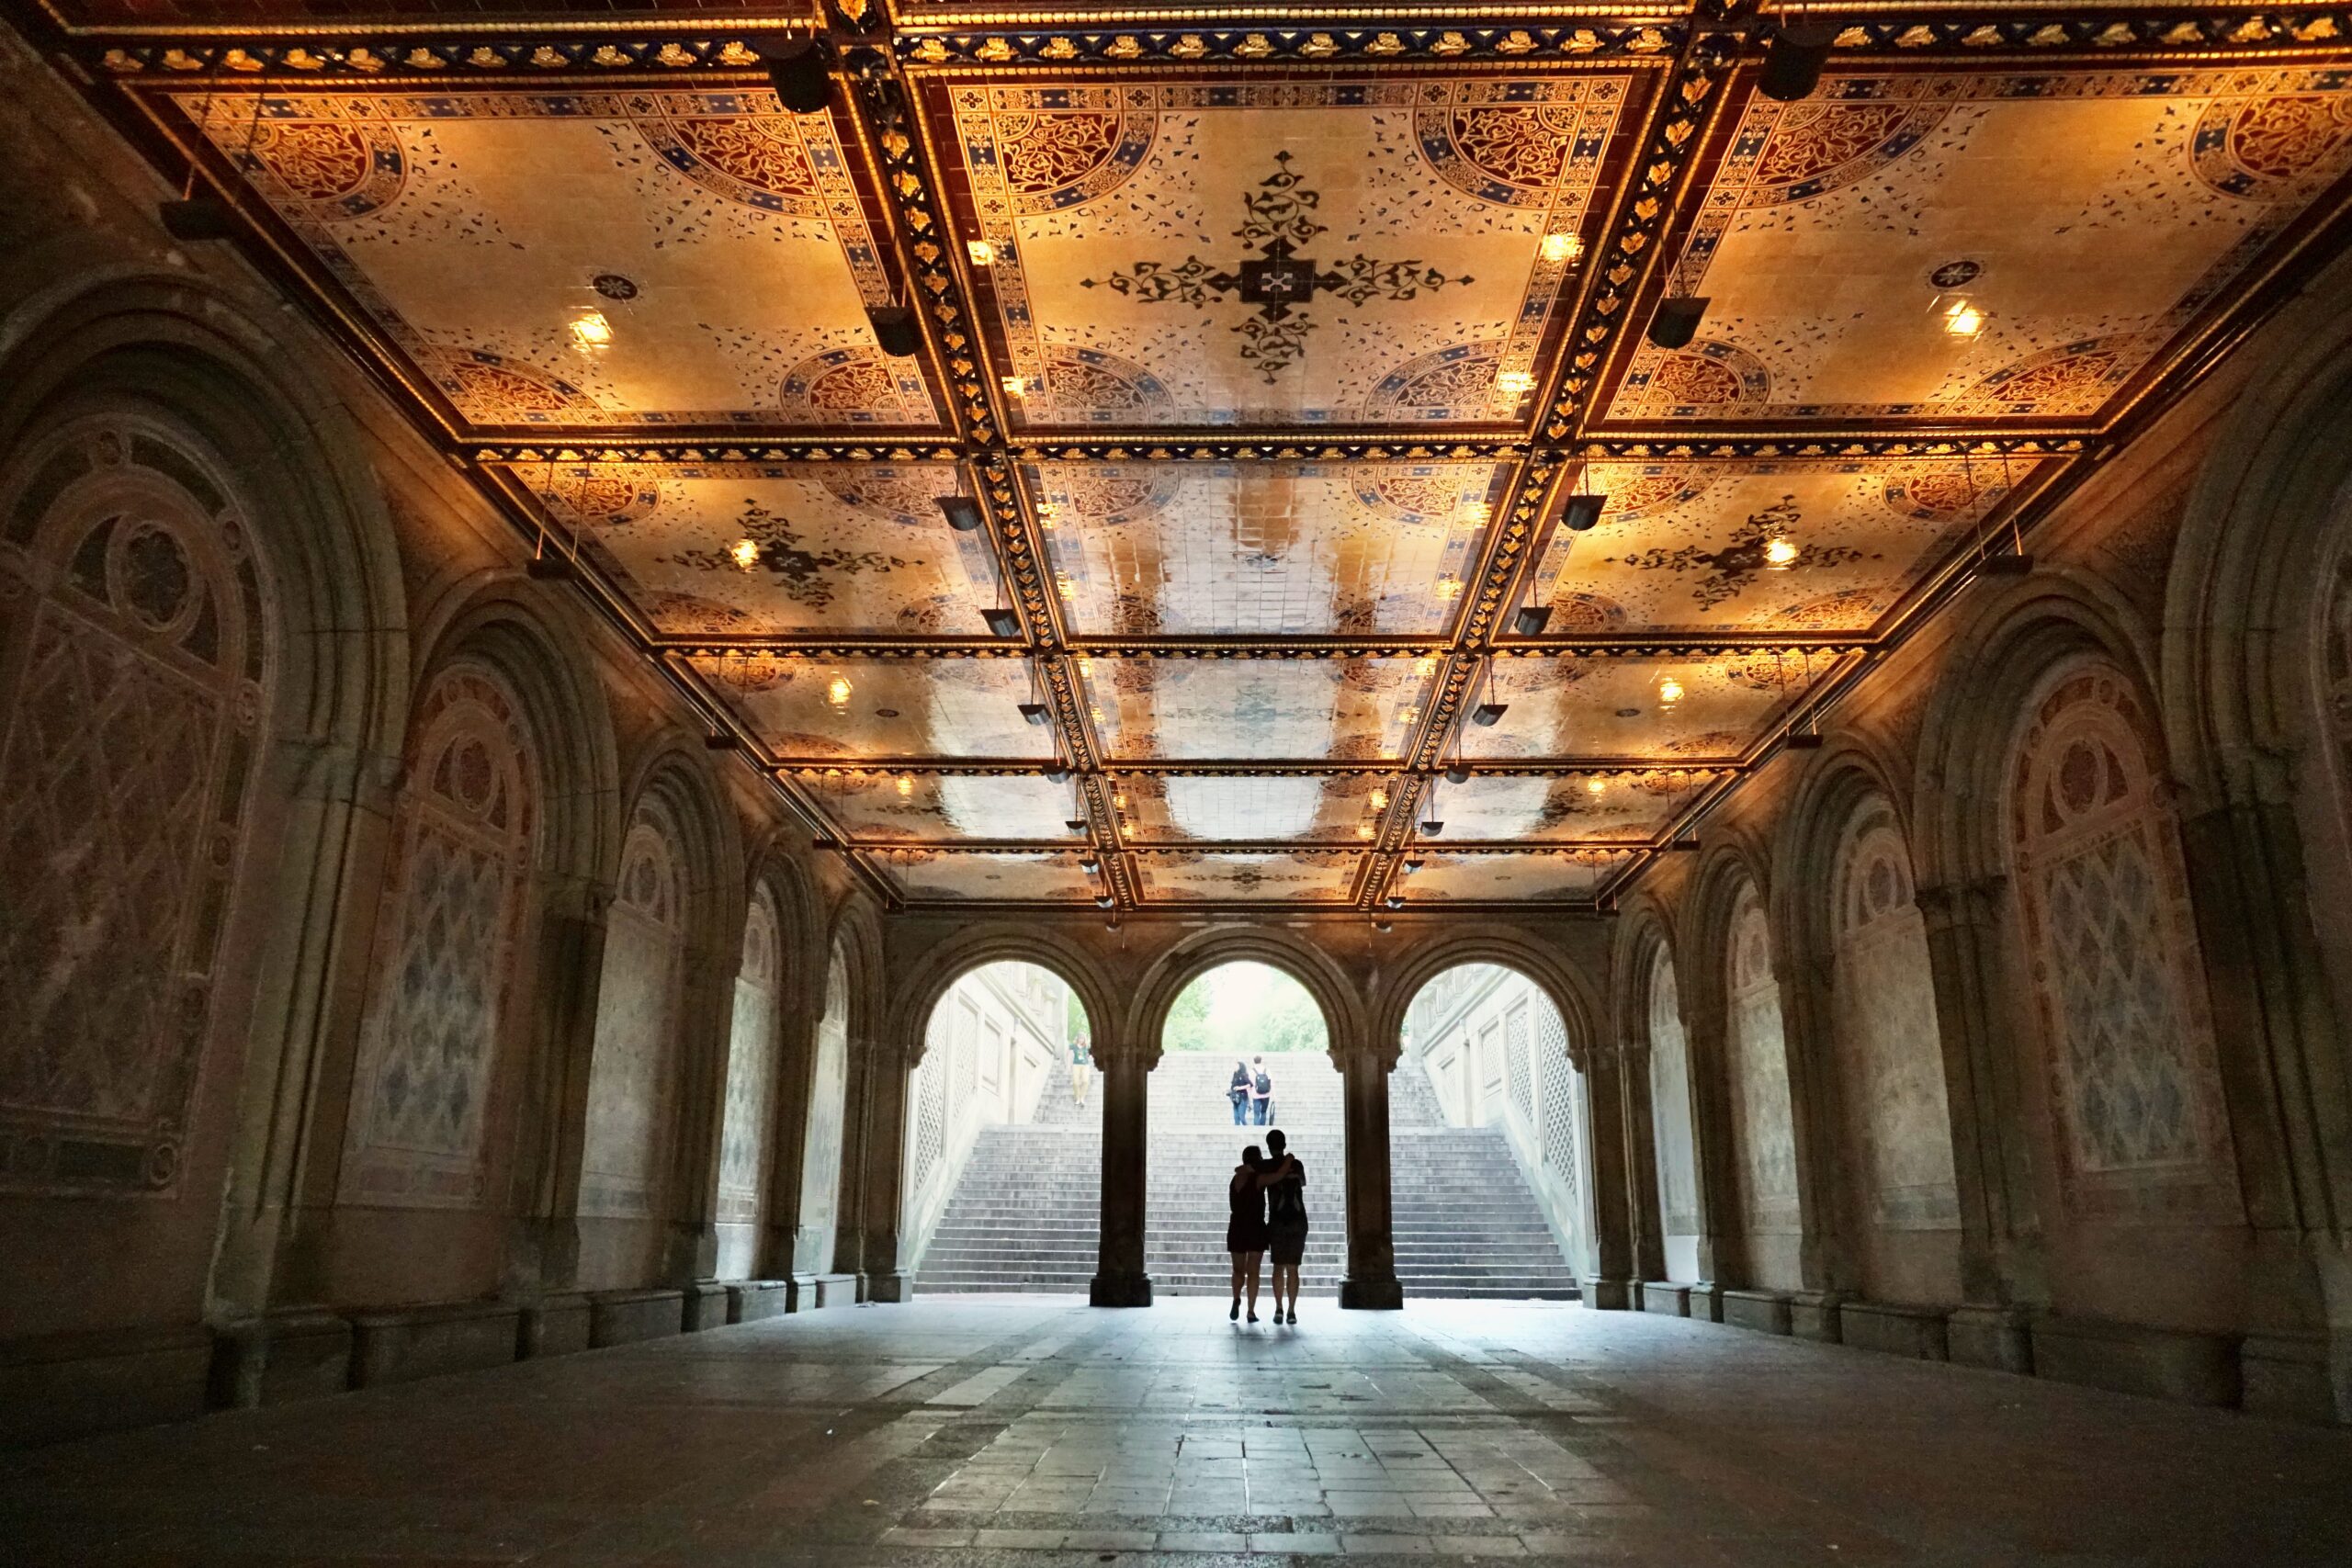 Bethesda Terrace Arcade empty view, best free things to do nyc Central Park